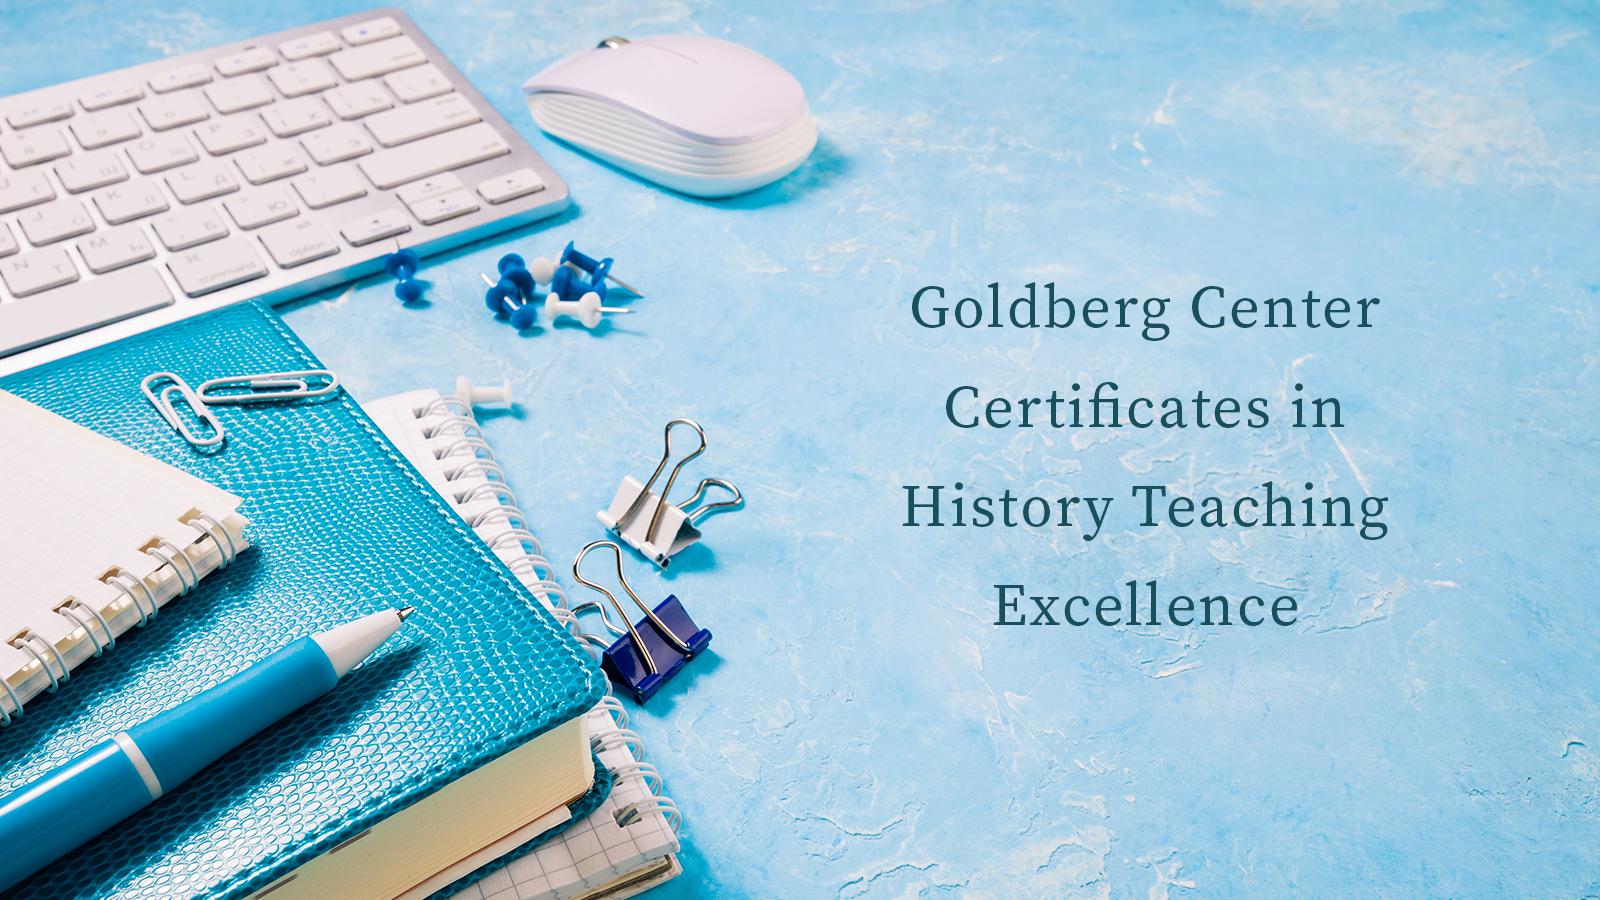 Goldberg Center Certificates in History Teaching Excellence text and notebooks, a pen, clips, pushpins, a keyboard and a computer mouse on a lightblue background